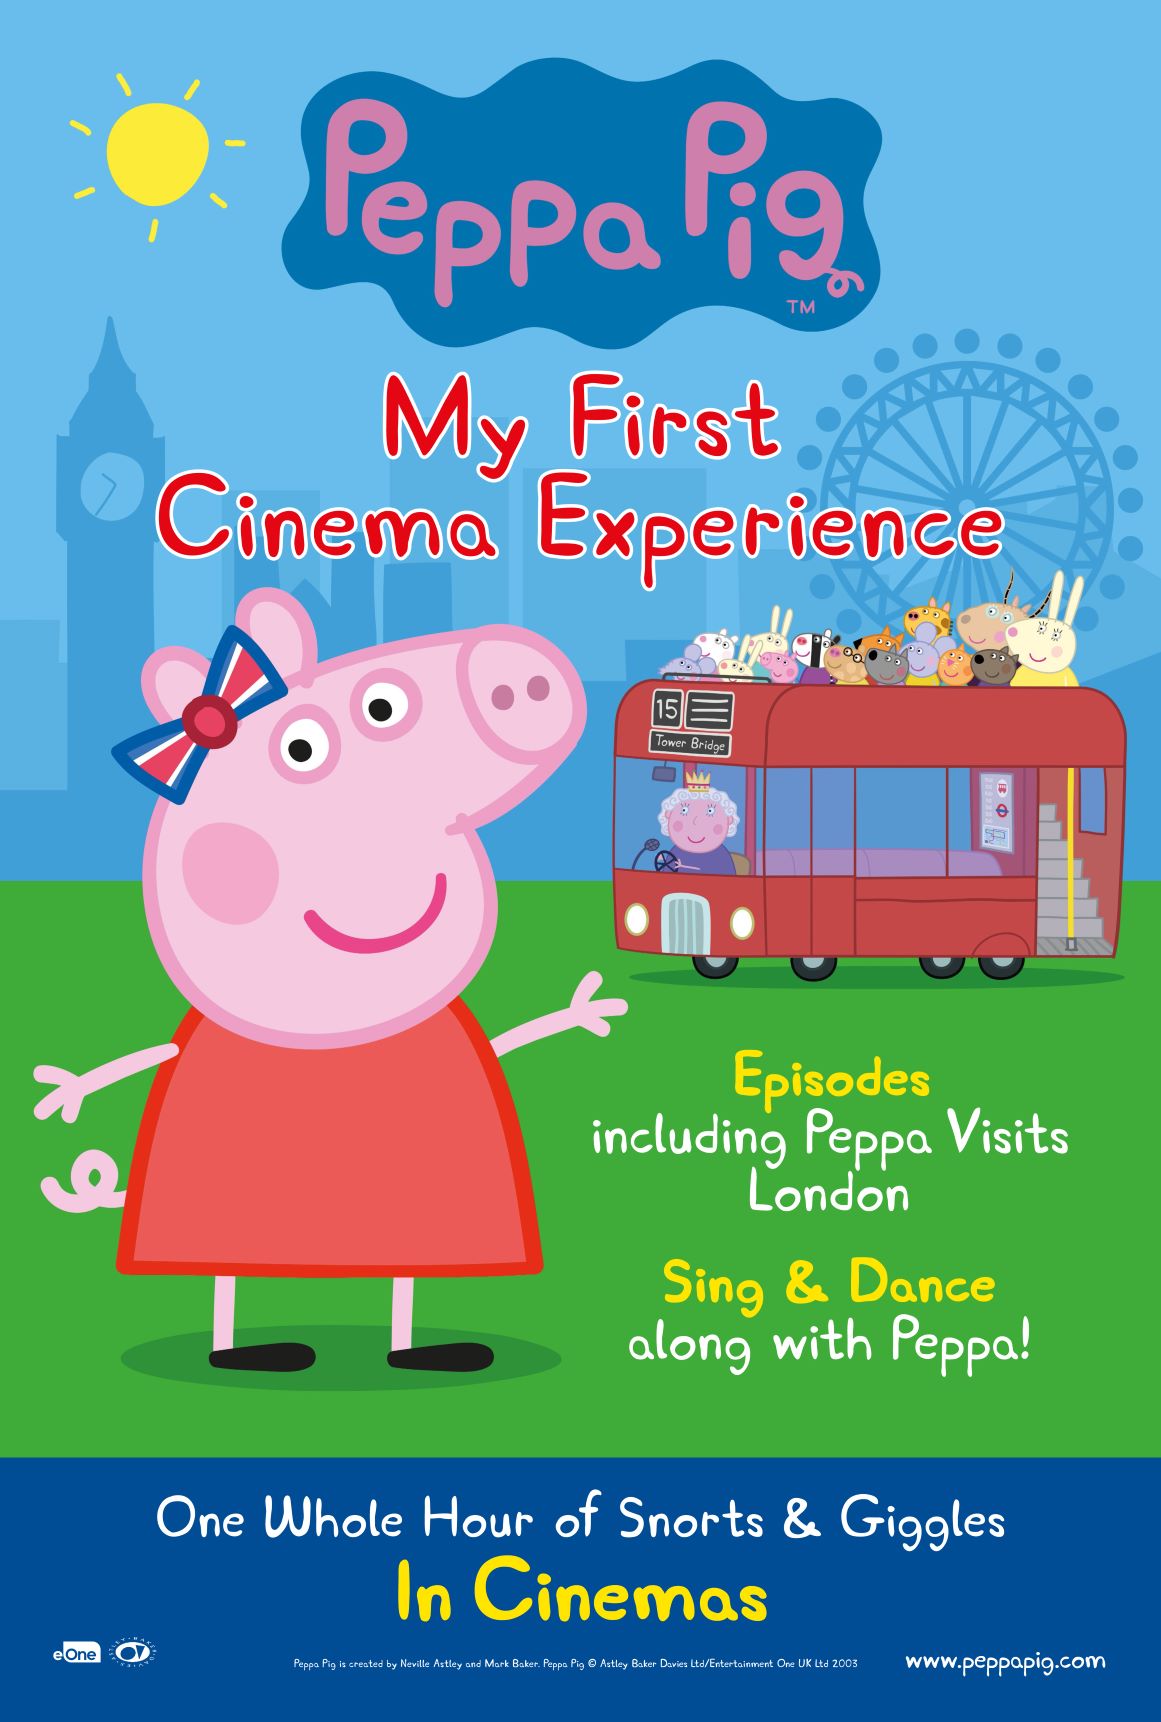 Peppa Pig: My First Cinema Experience Poster